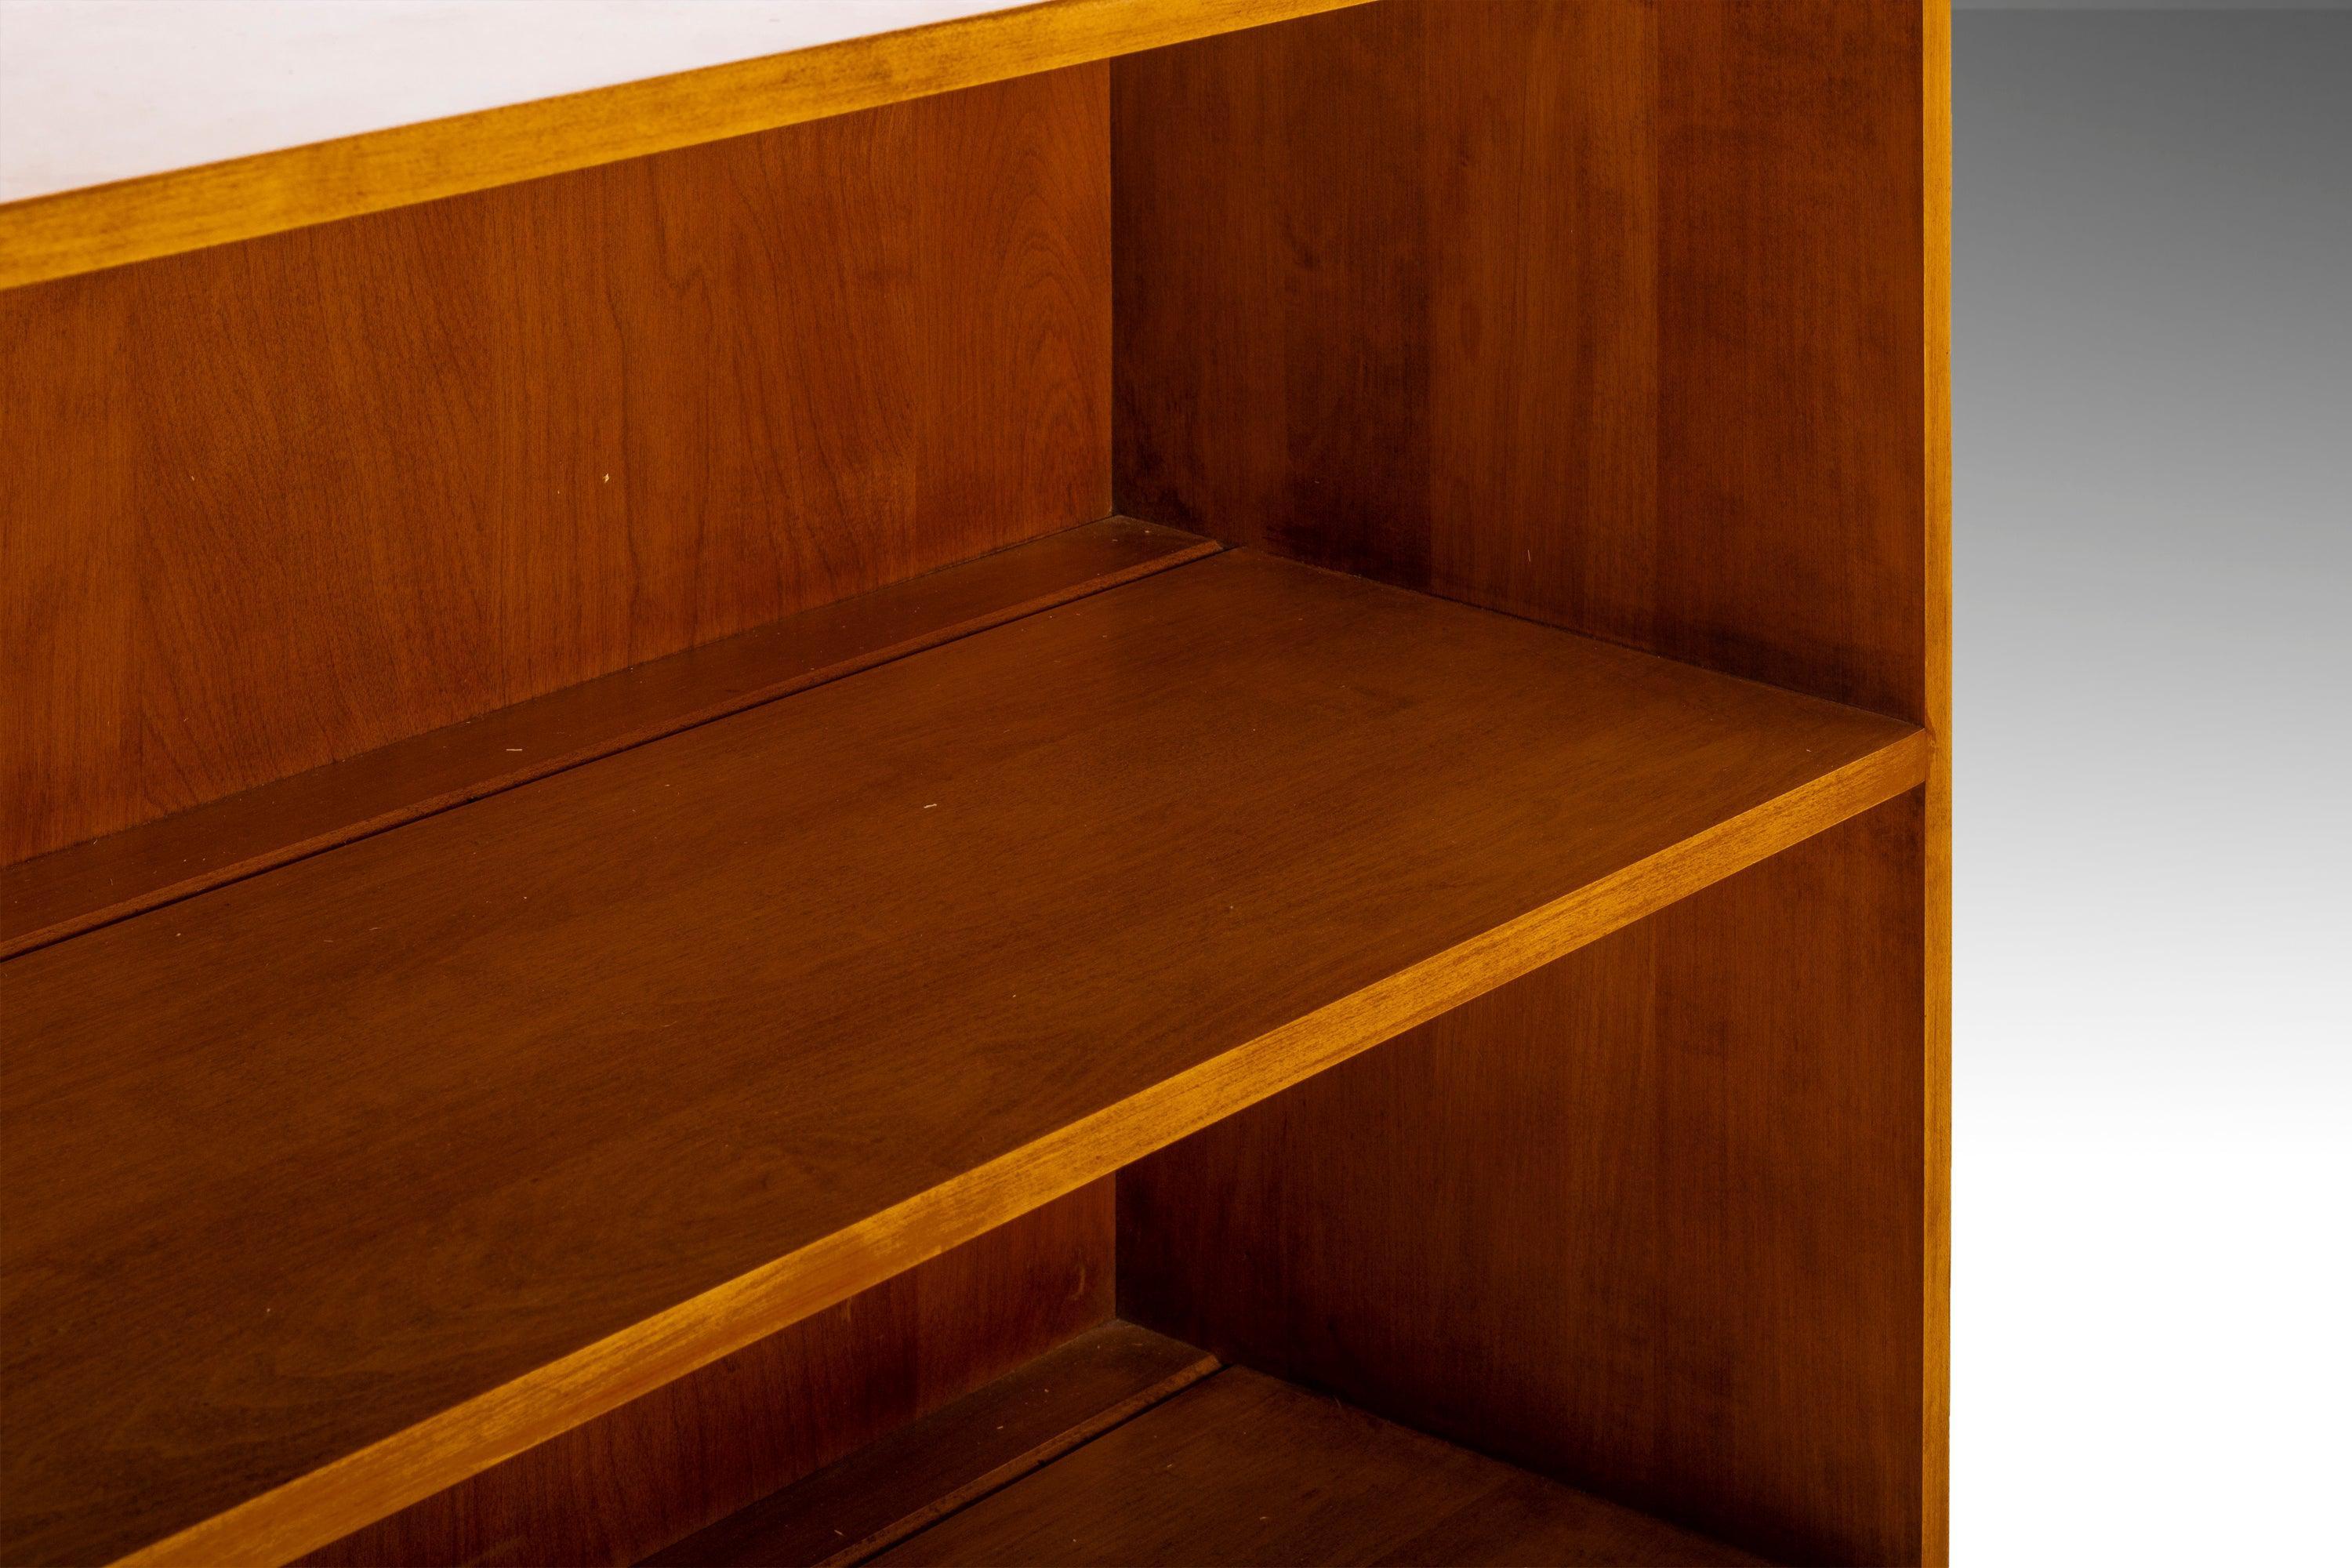 Mid-20th Century Bookcase / Entry Table by Paul McCobb for Winchendon Planner Group, USA, c. 1960